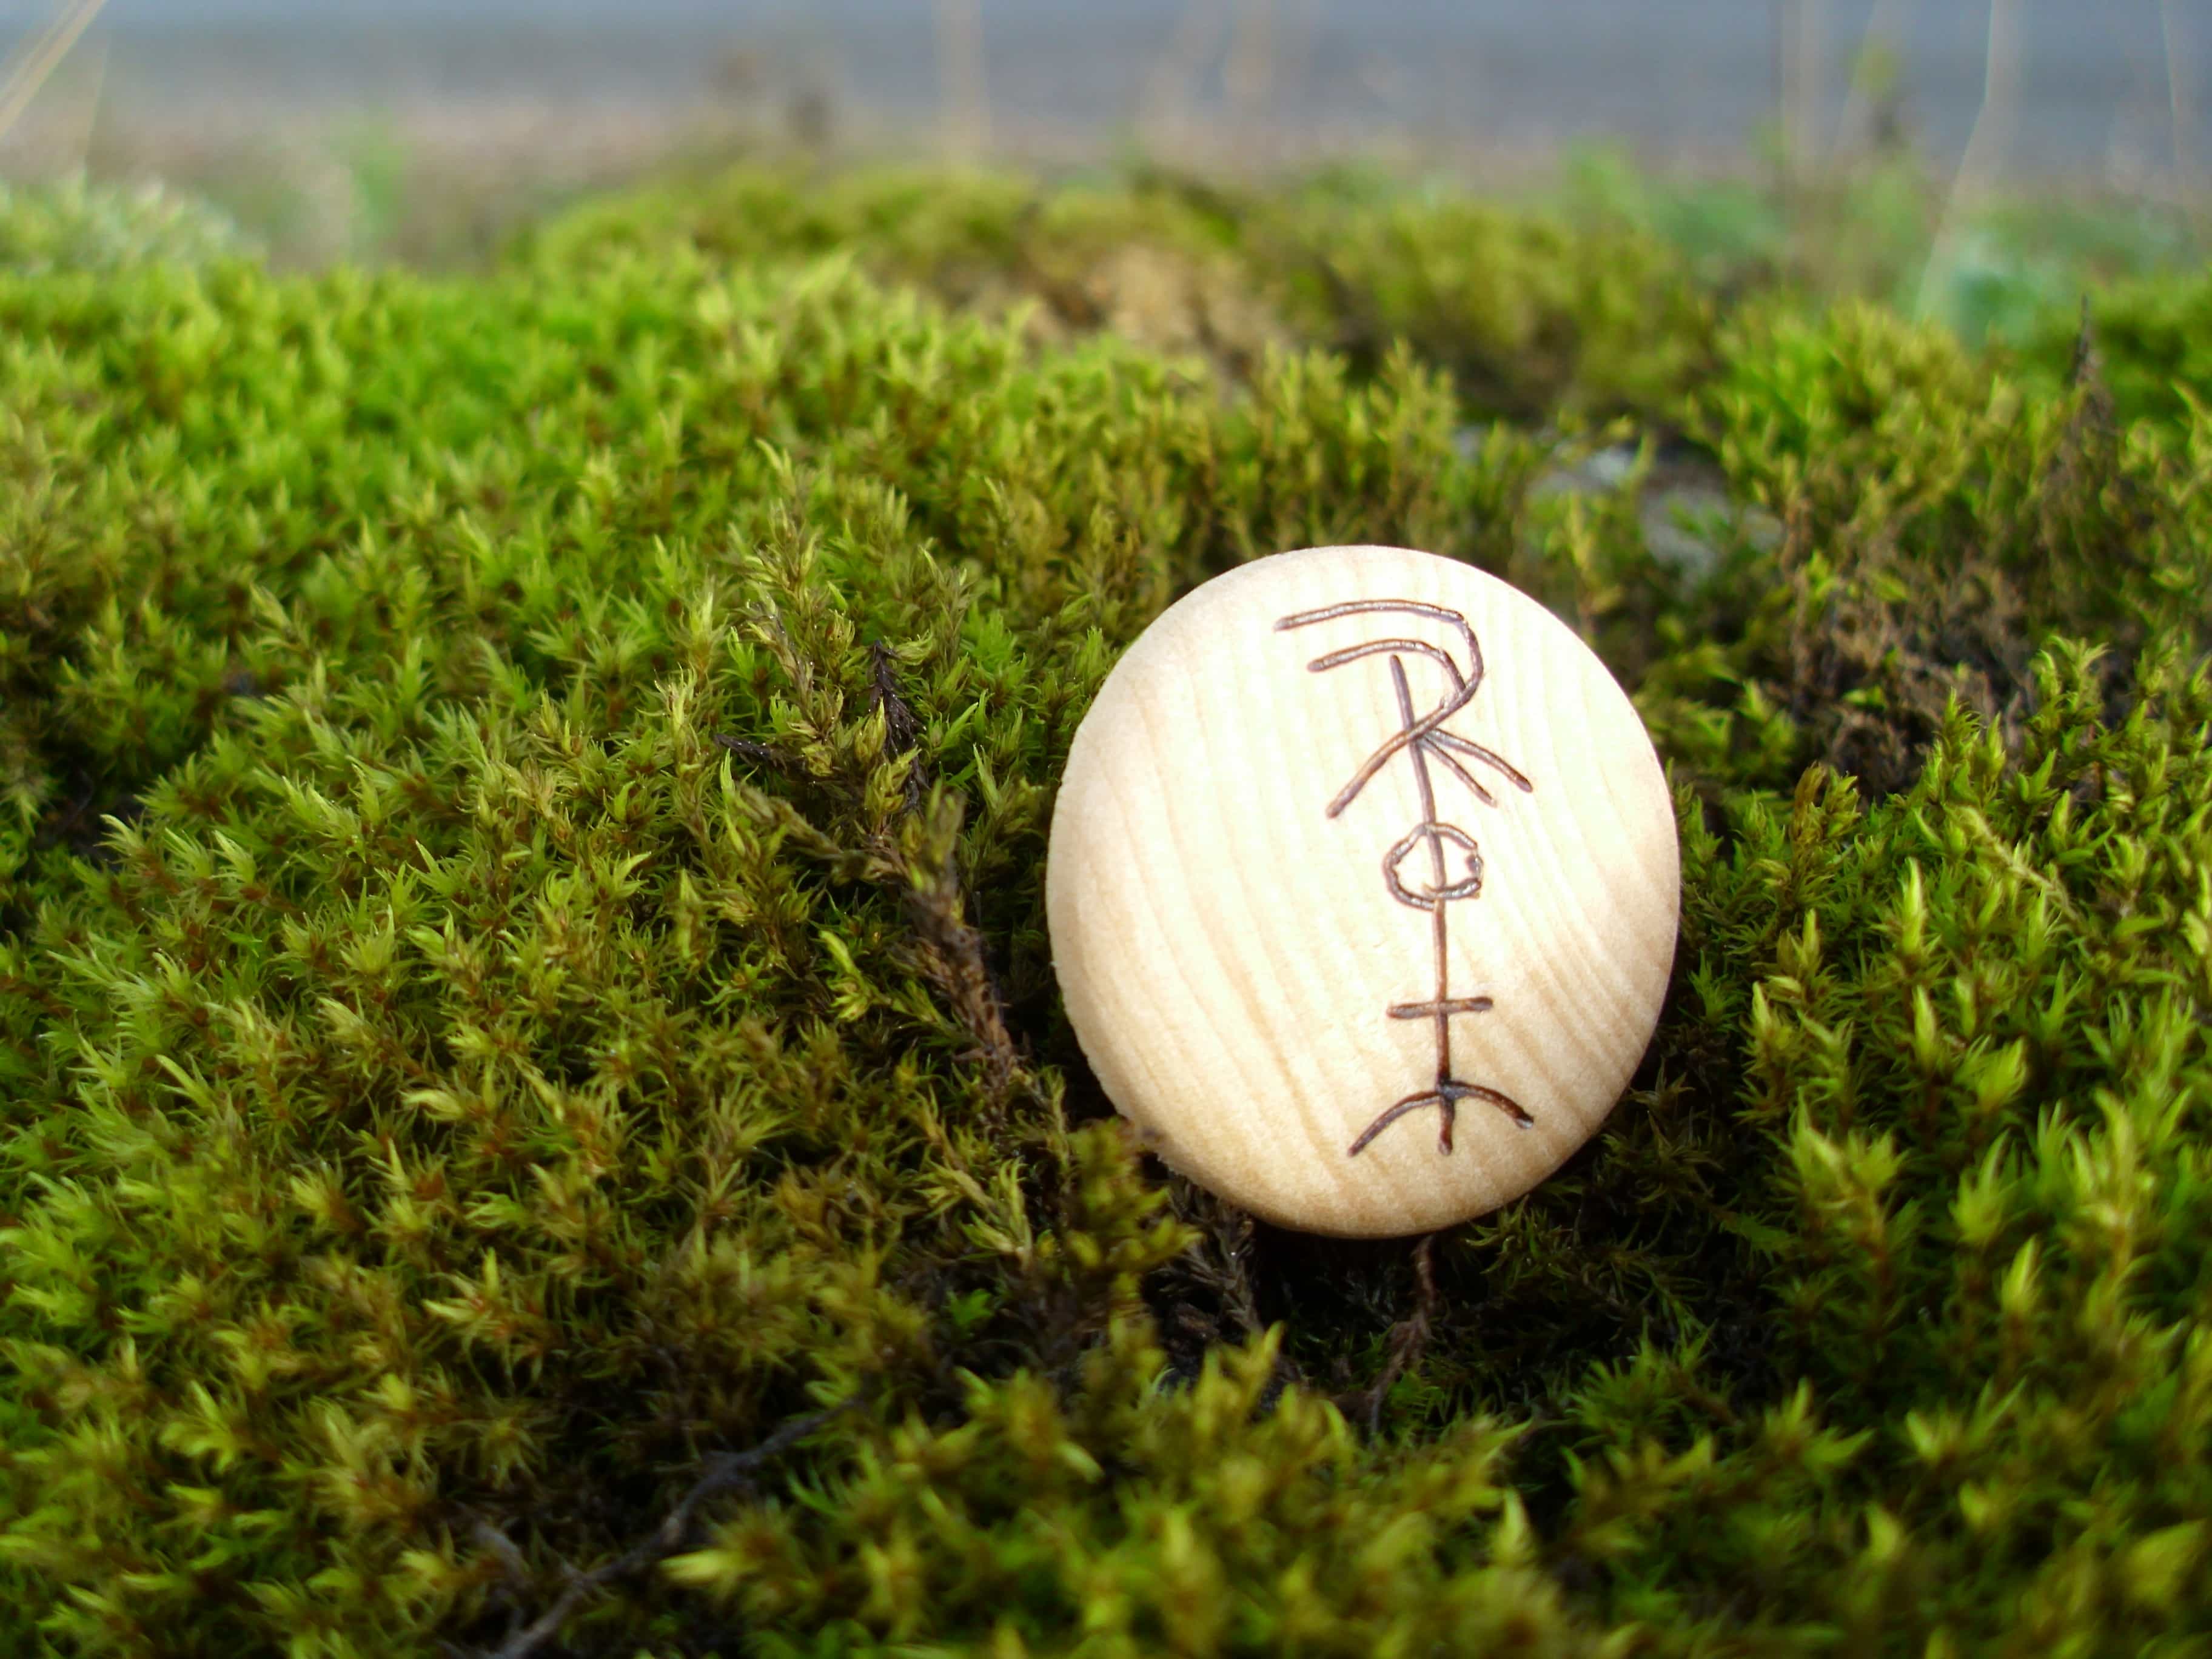 Freyr - Pocket Rune to ward off ill effects of magical incantations - Wooden Rune Amulet